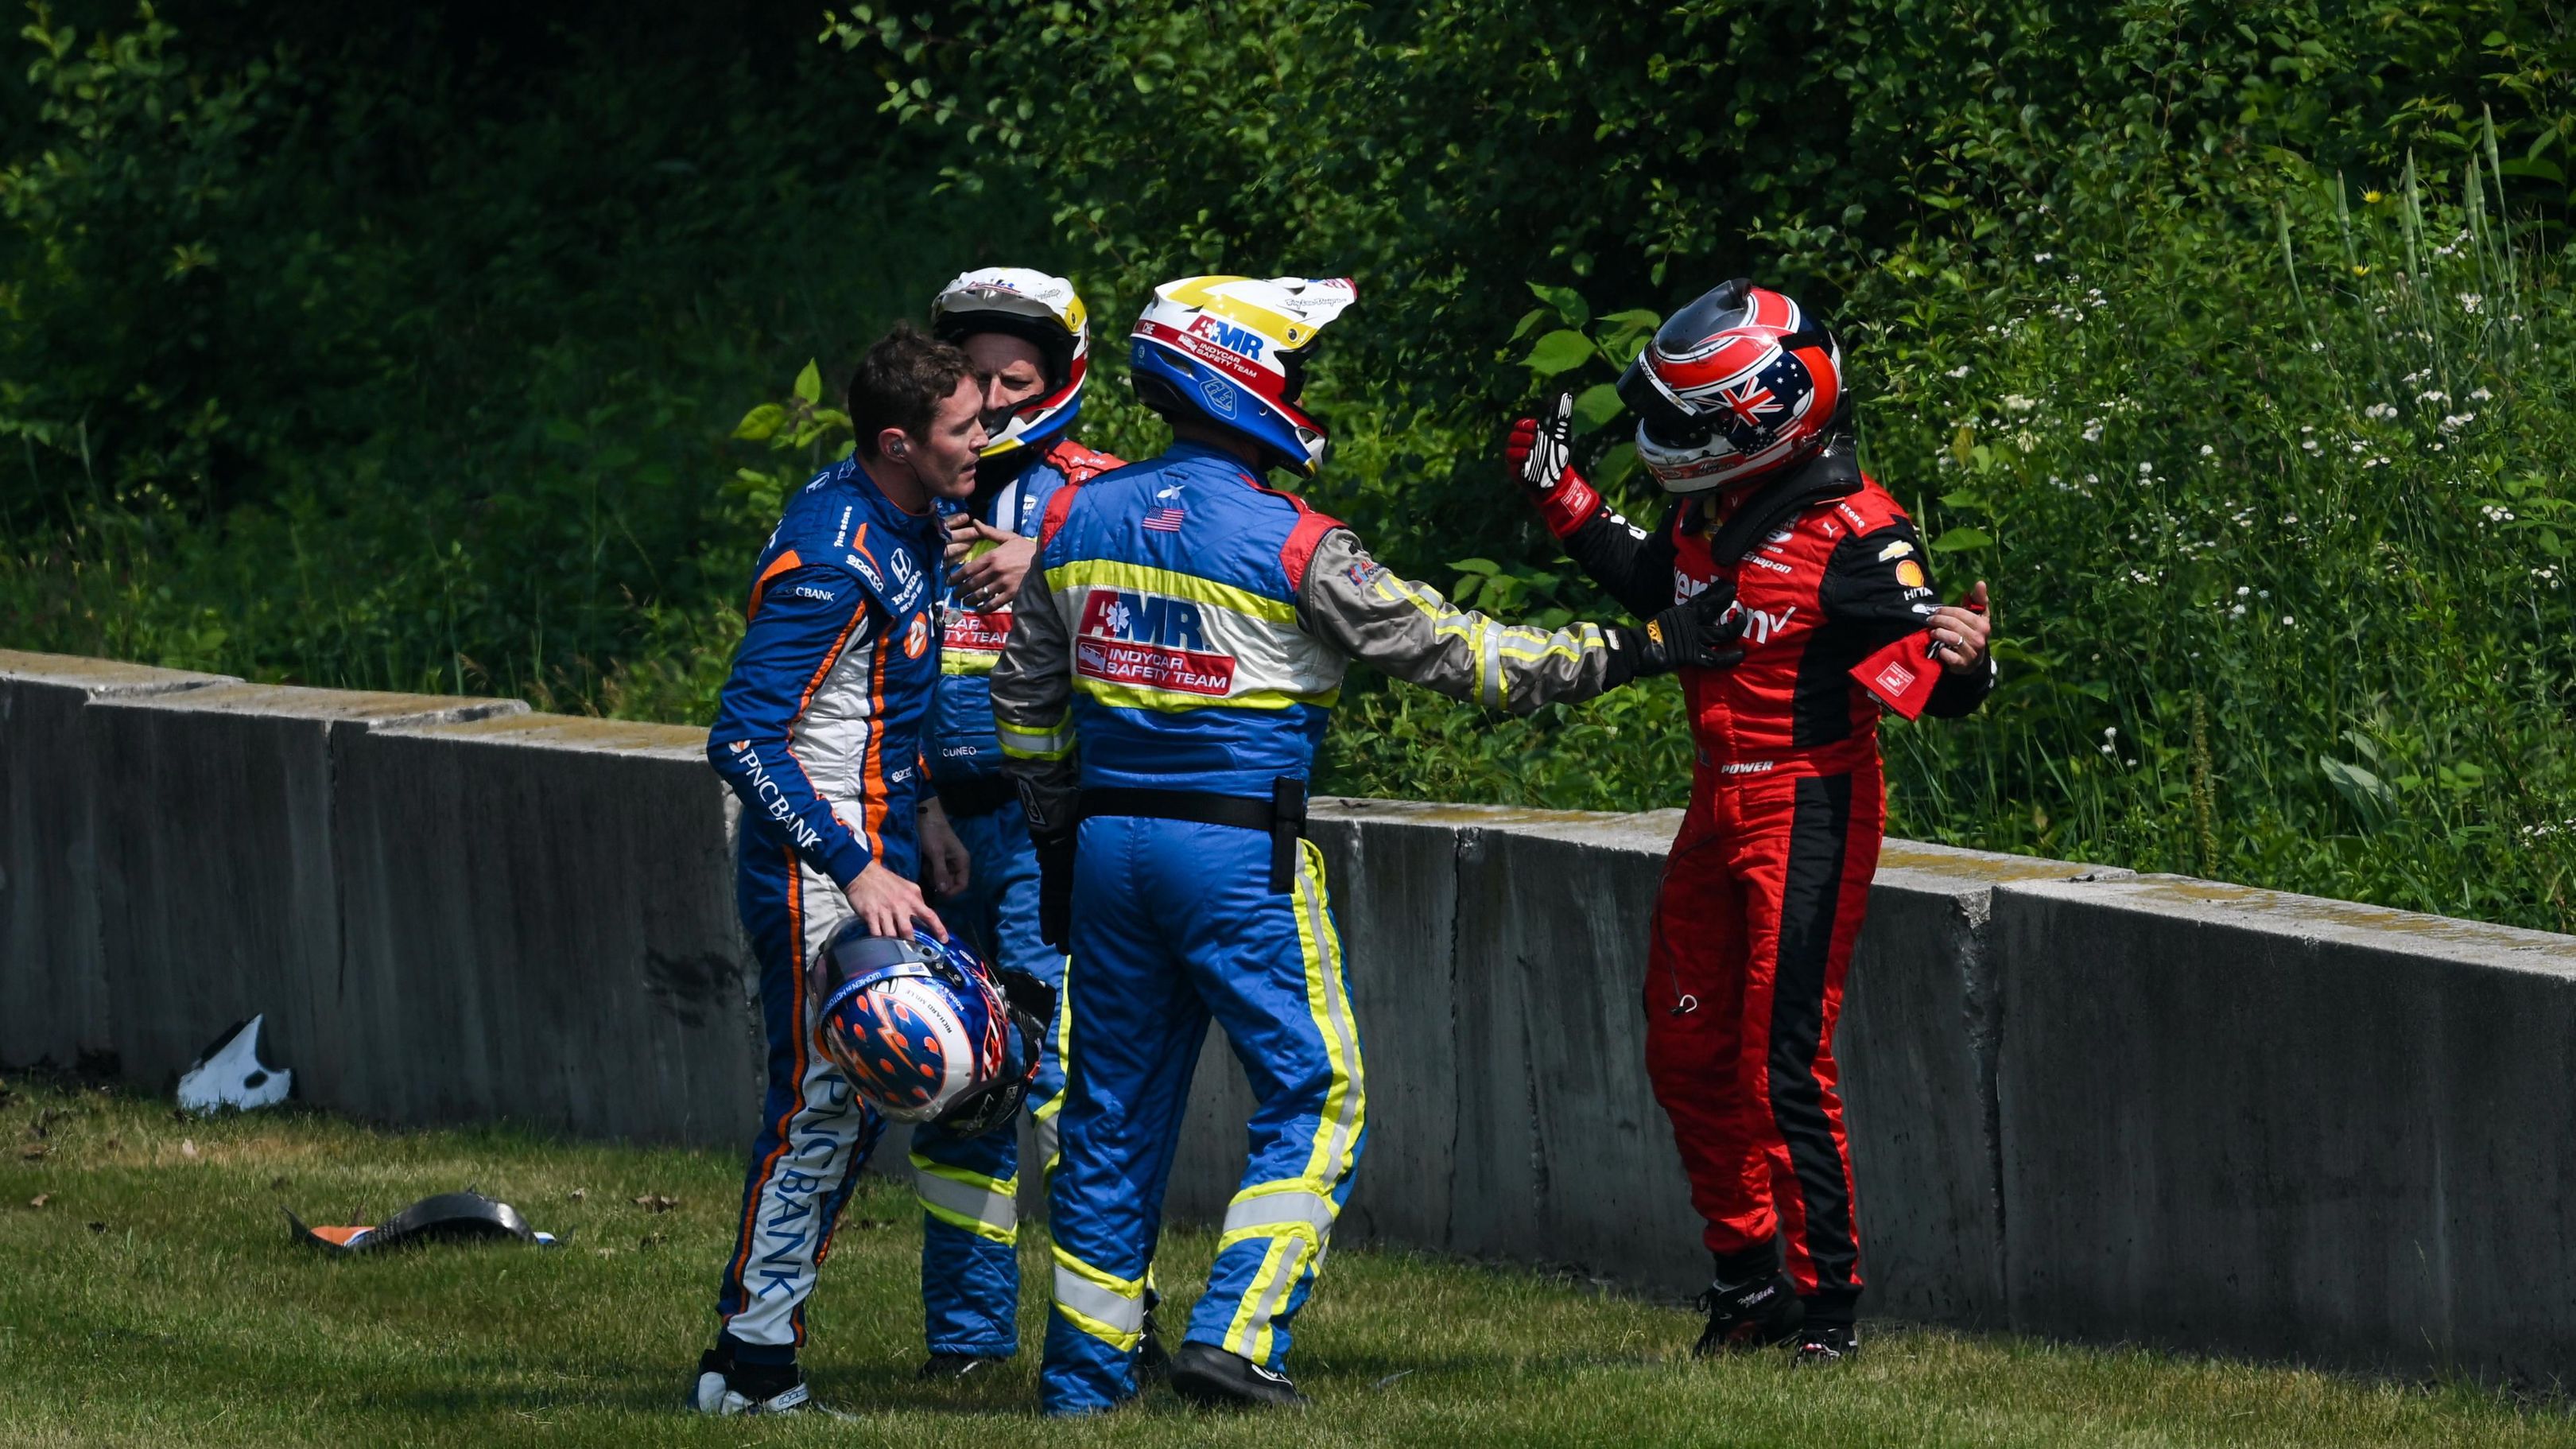 Will Power (right) confronts Scott Dixon after crashing in practice.